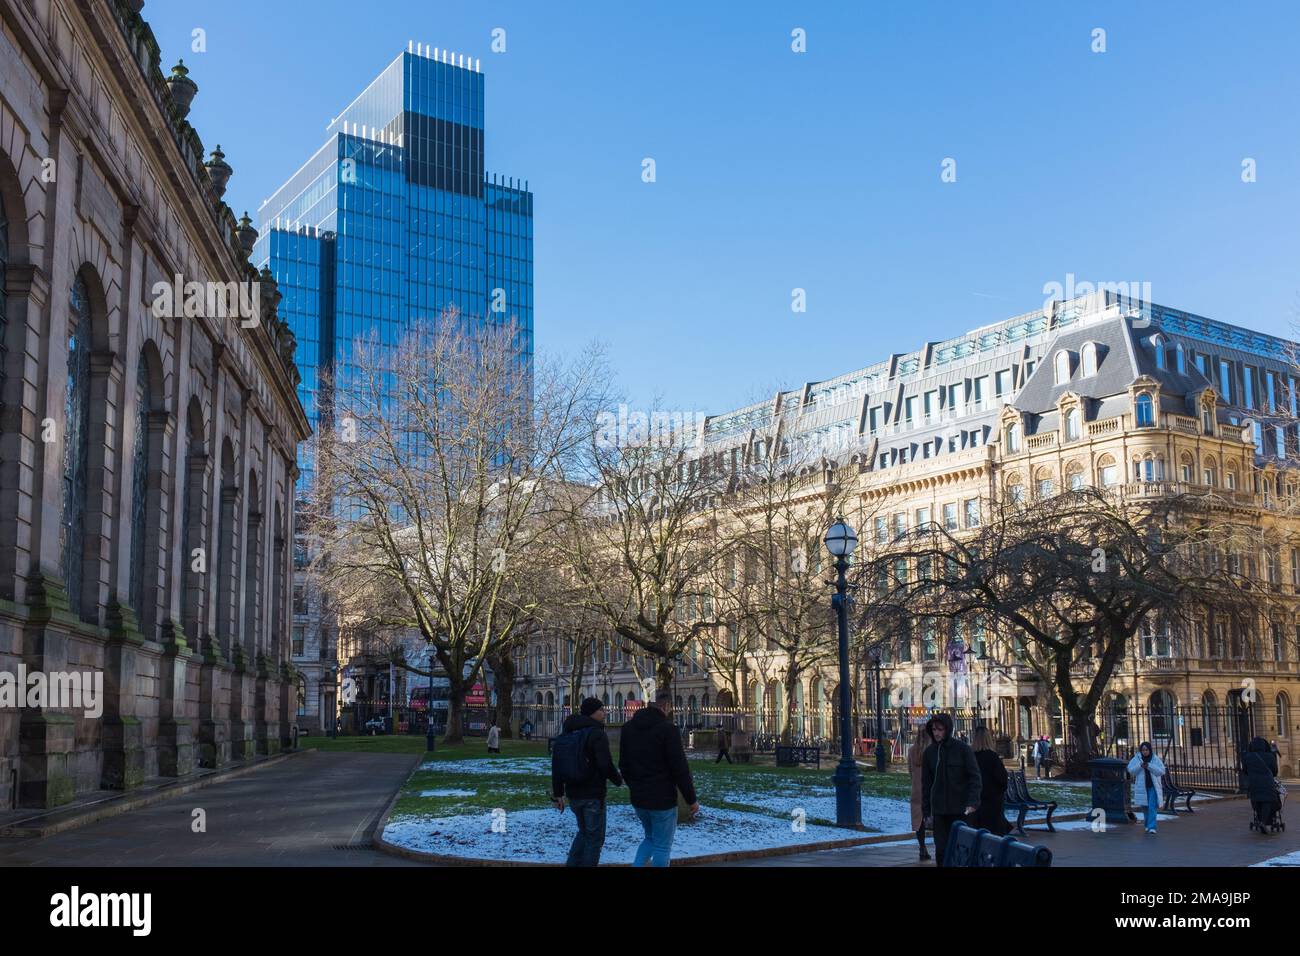 Colmore Row in Birmingham city centre with St Phillips Cathedral and 103 Colmore Row building Stock Photo